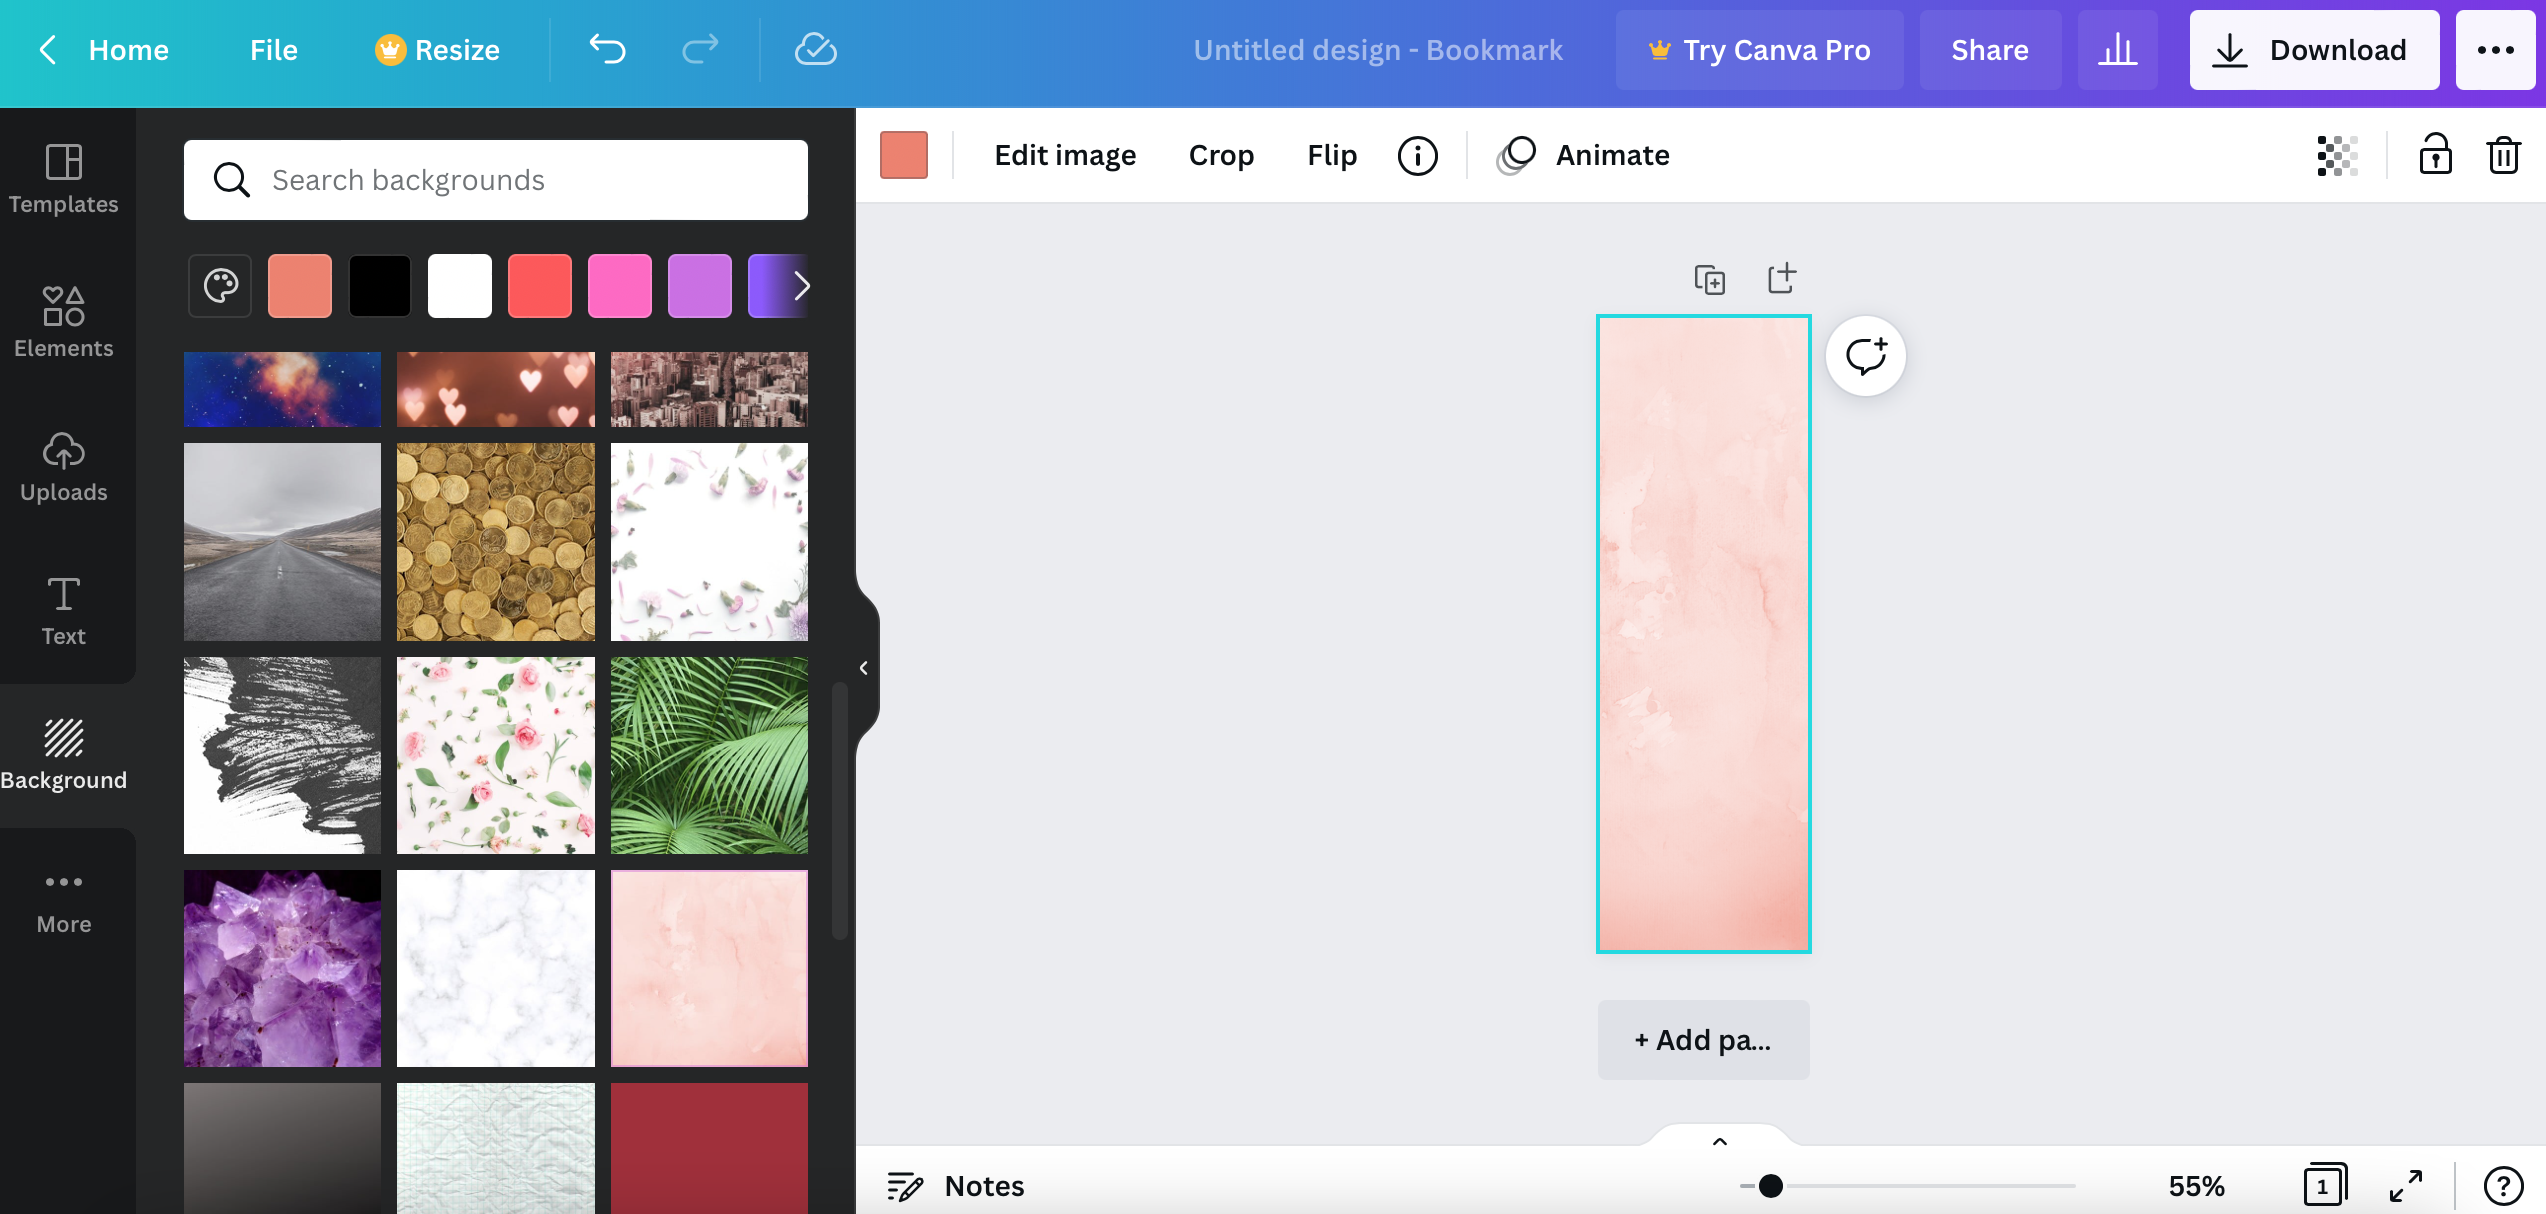 screenshot of a bookmark with a pink background in Canva